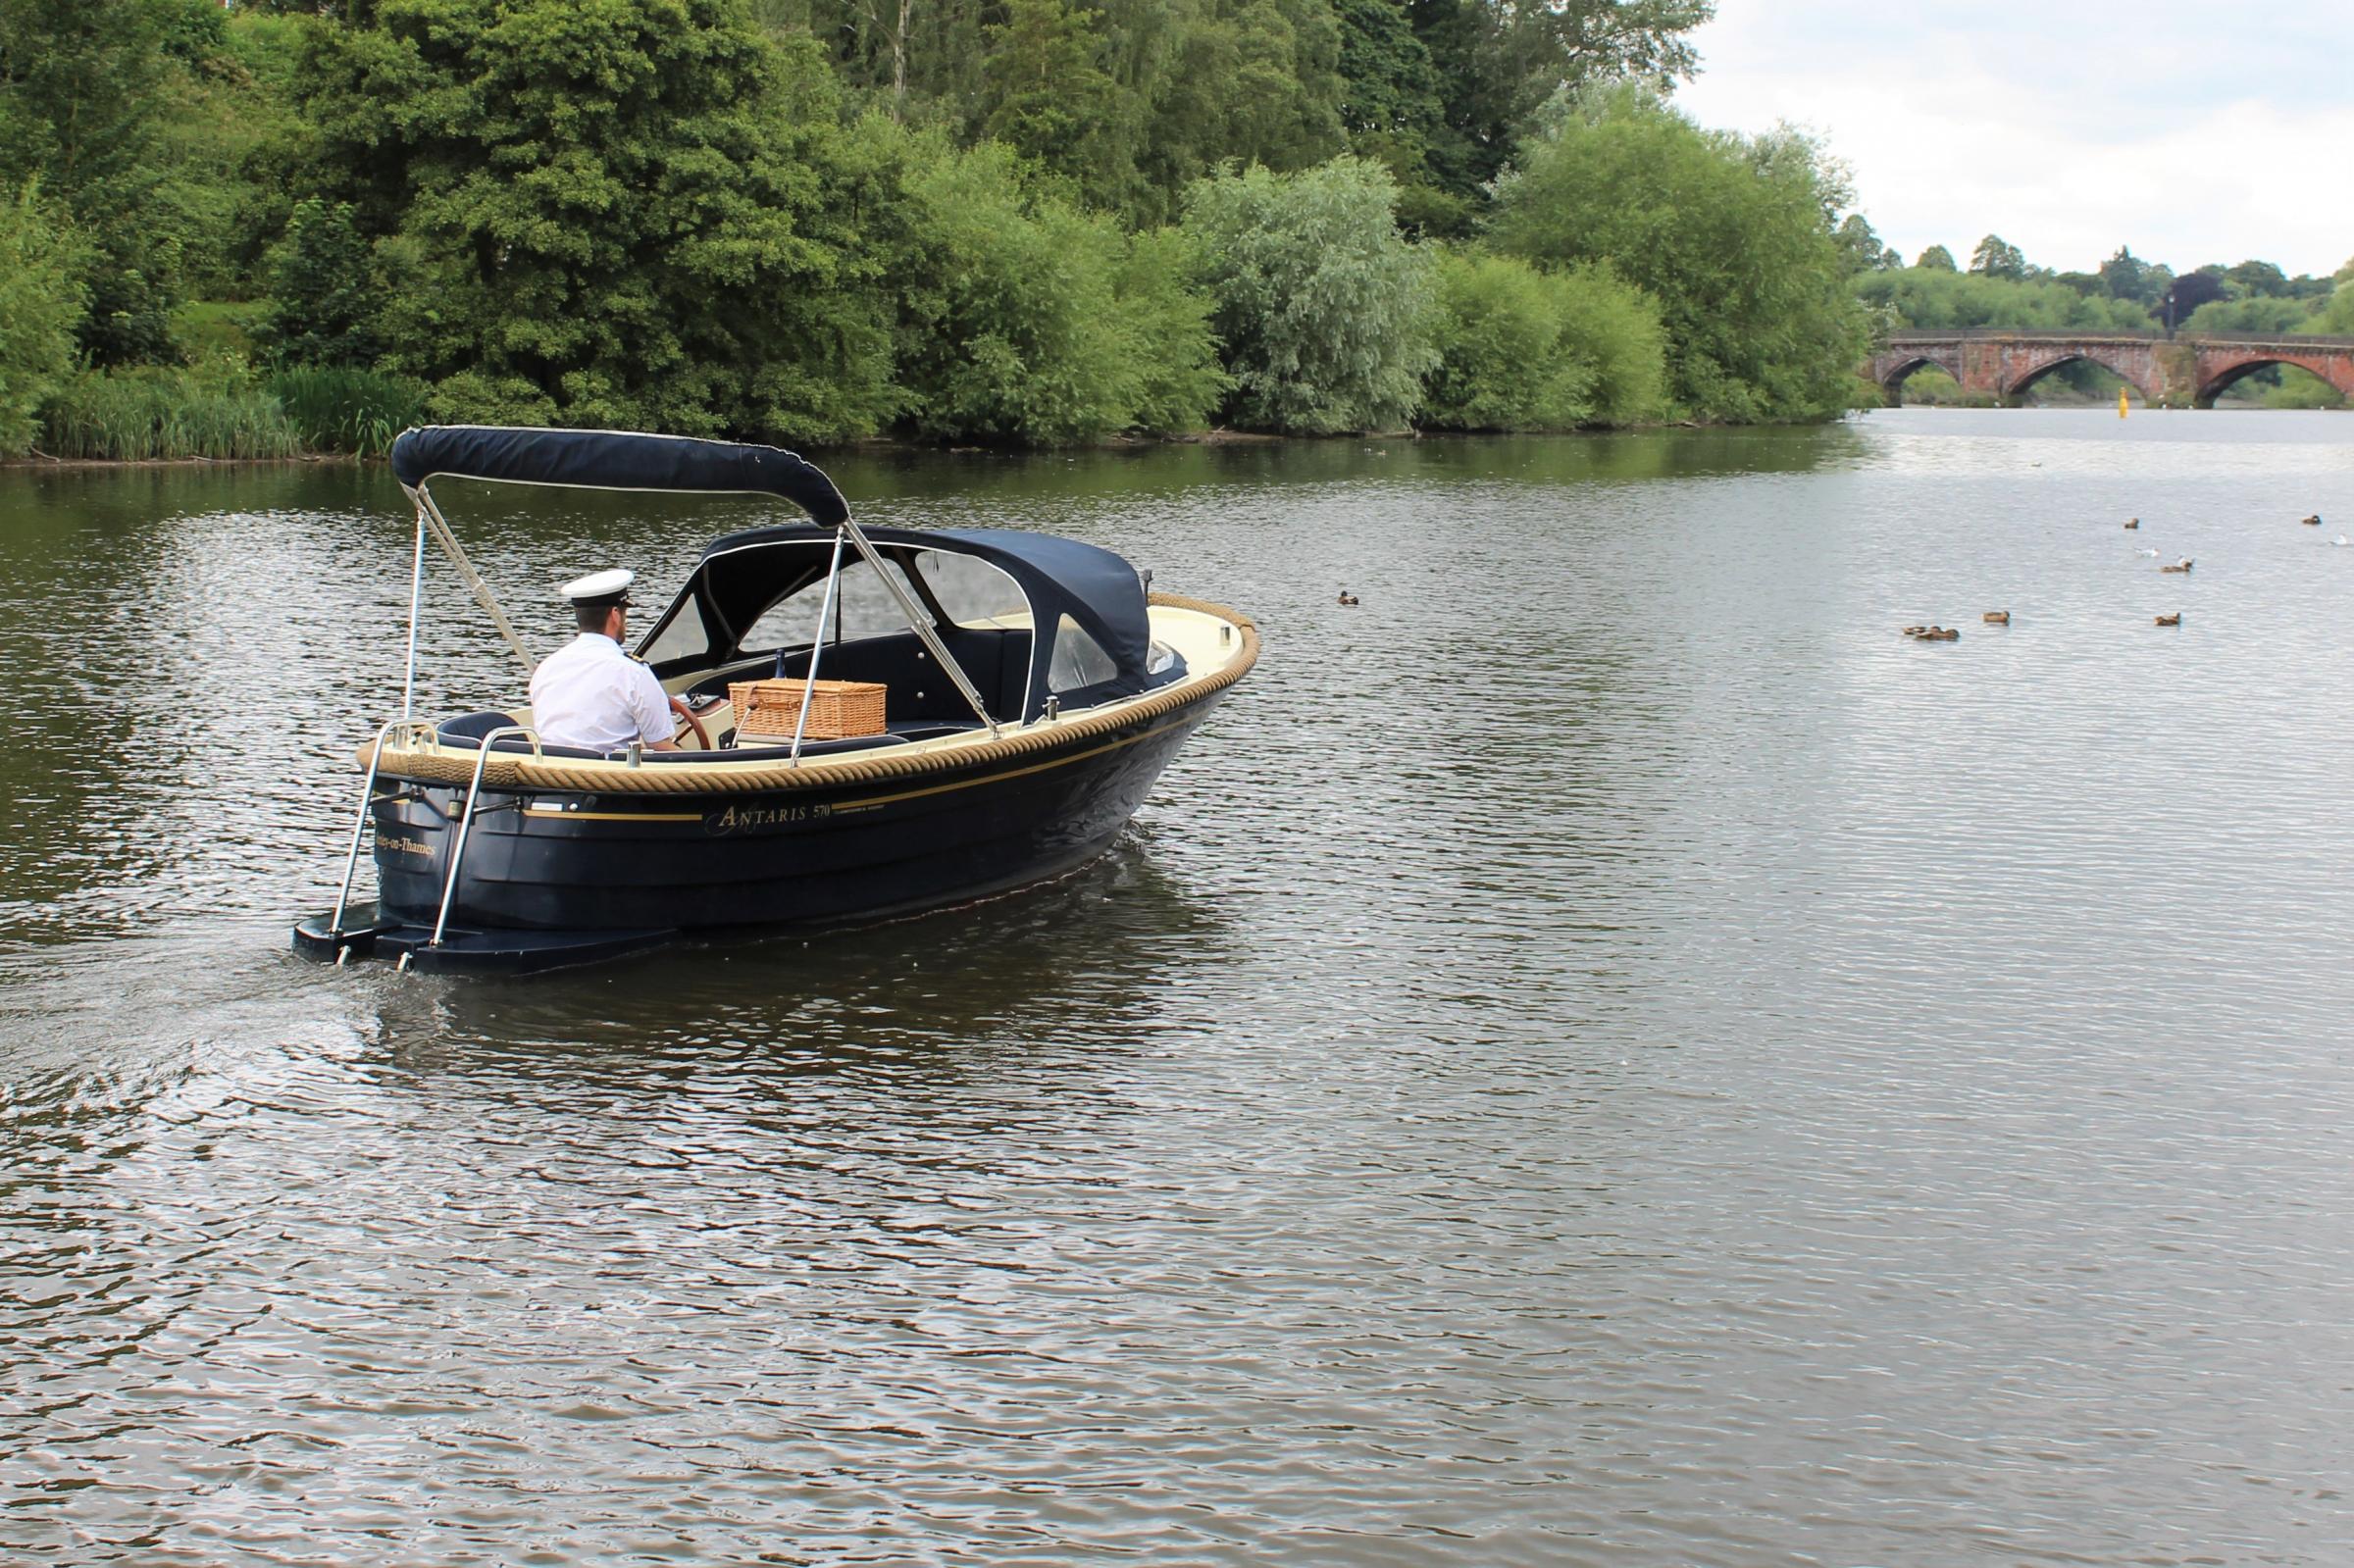 Chester Boat is skippering new private picnic trips on the river for up to six passengers.